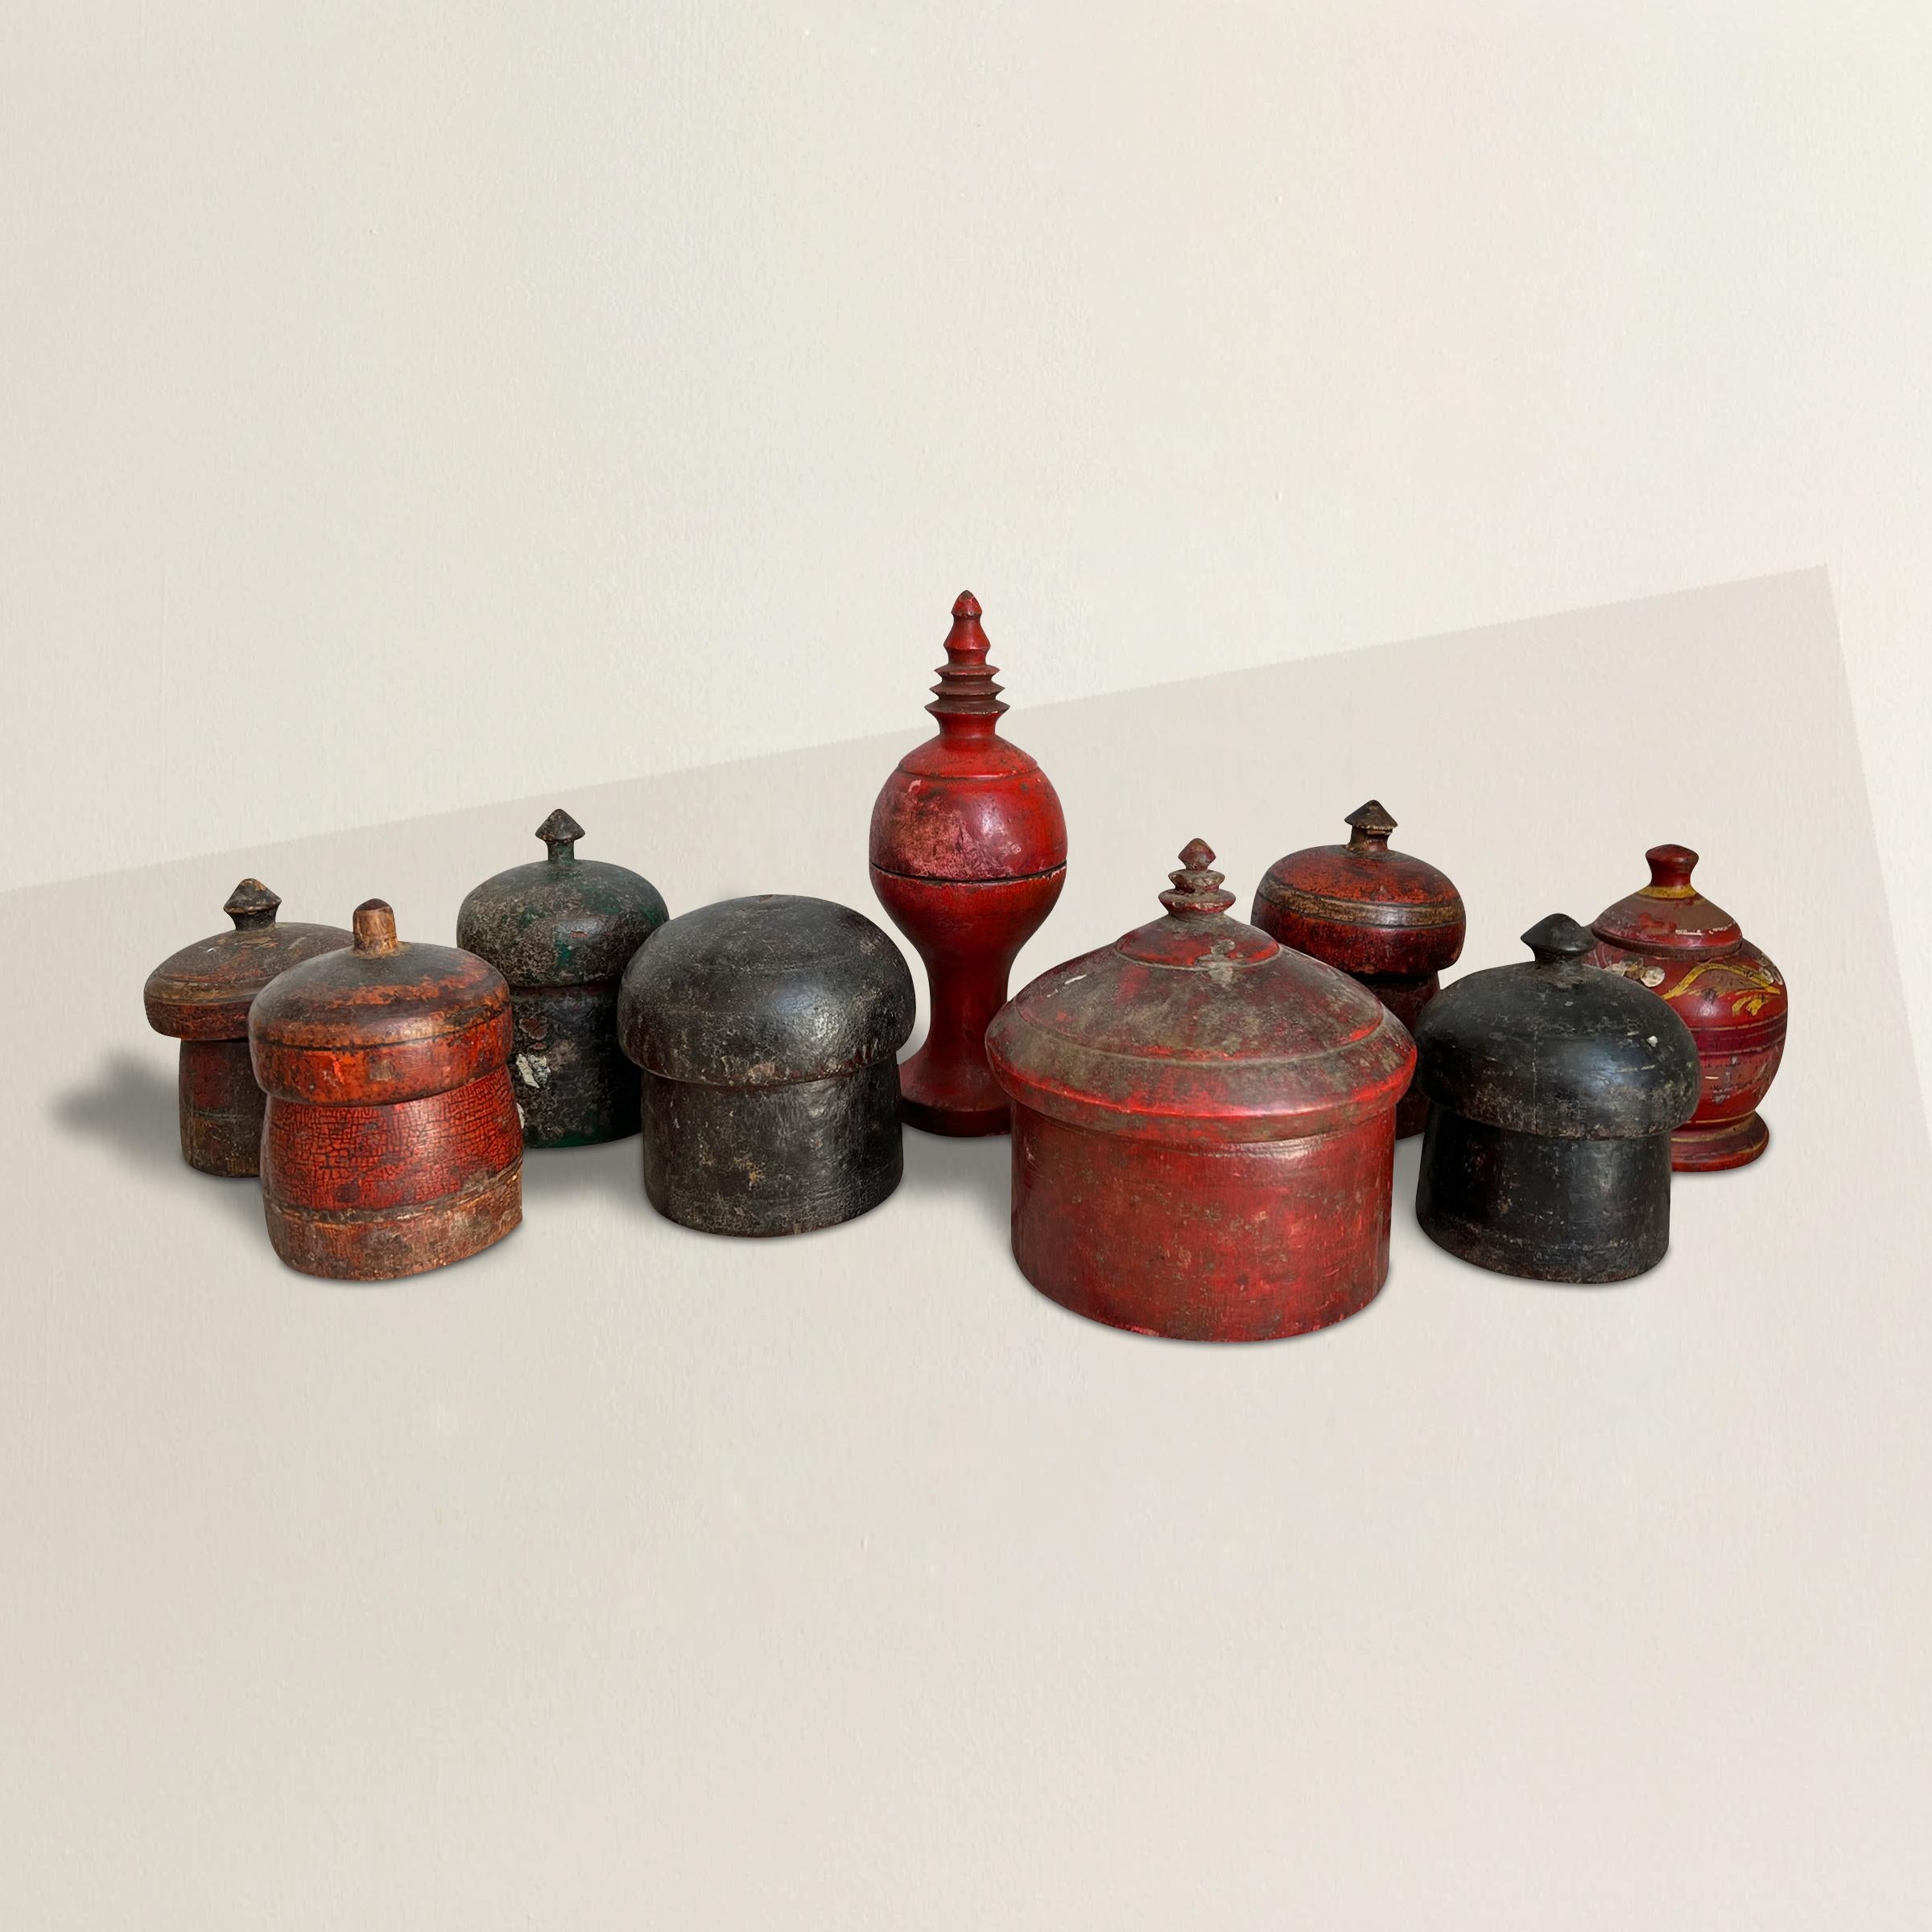 A wonderfully sculptural set of nine 19th century Indian hand carved red and black painted wood spice boxes perfect for storing all kinds of vices!

Largest: 4.5 in. diameter x 5 in. height
Tallest: 2.5 in. diameter x 7.5 in. height
Shortest: 3